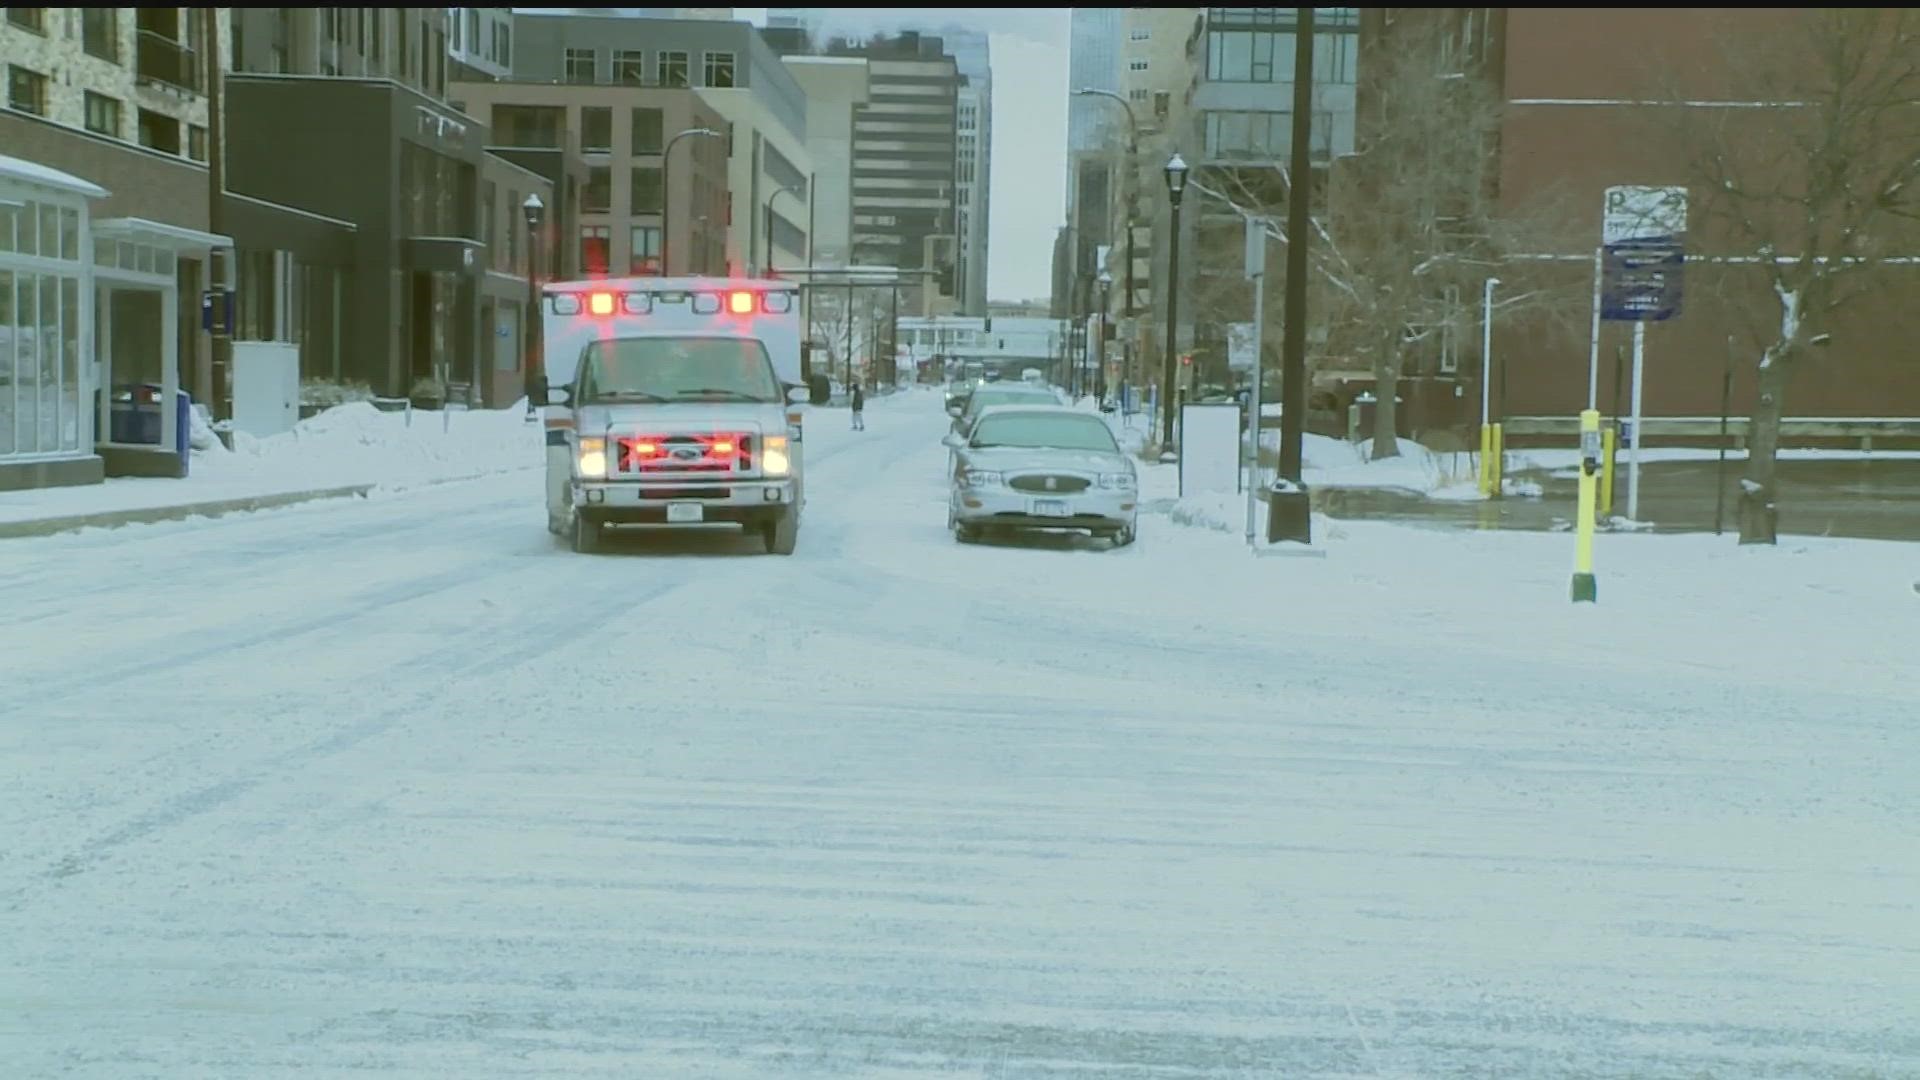 First responders are also expecting to see more car accidents and an increased number of cardiac events with residents shoveling heavy snow.